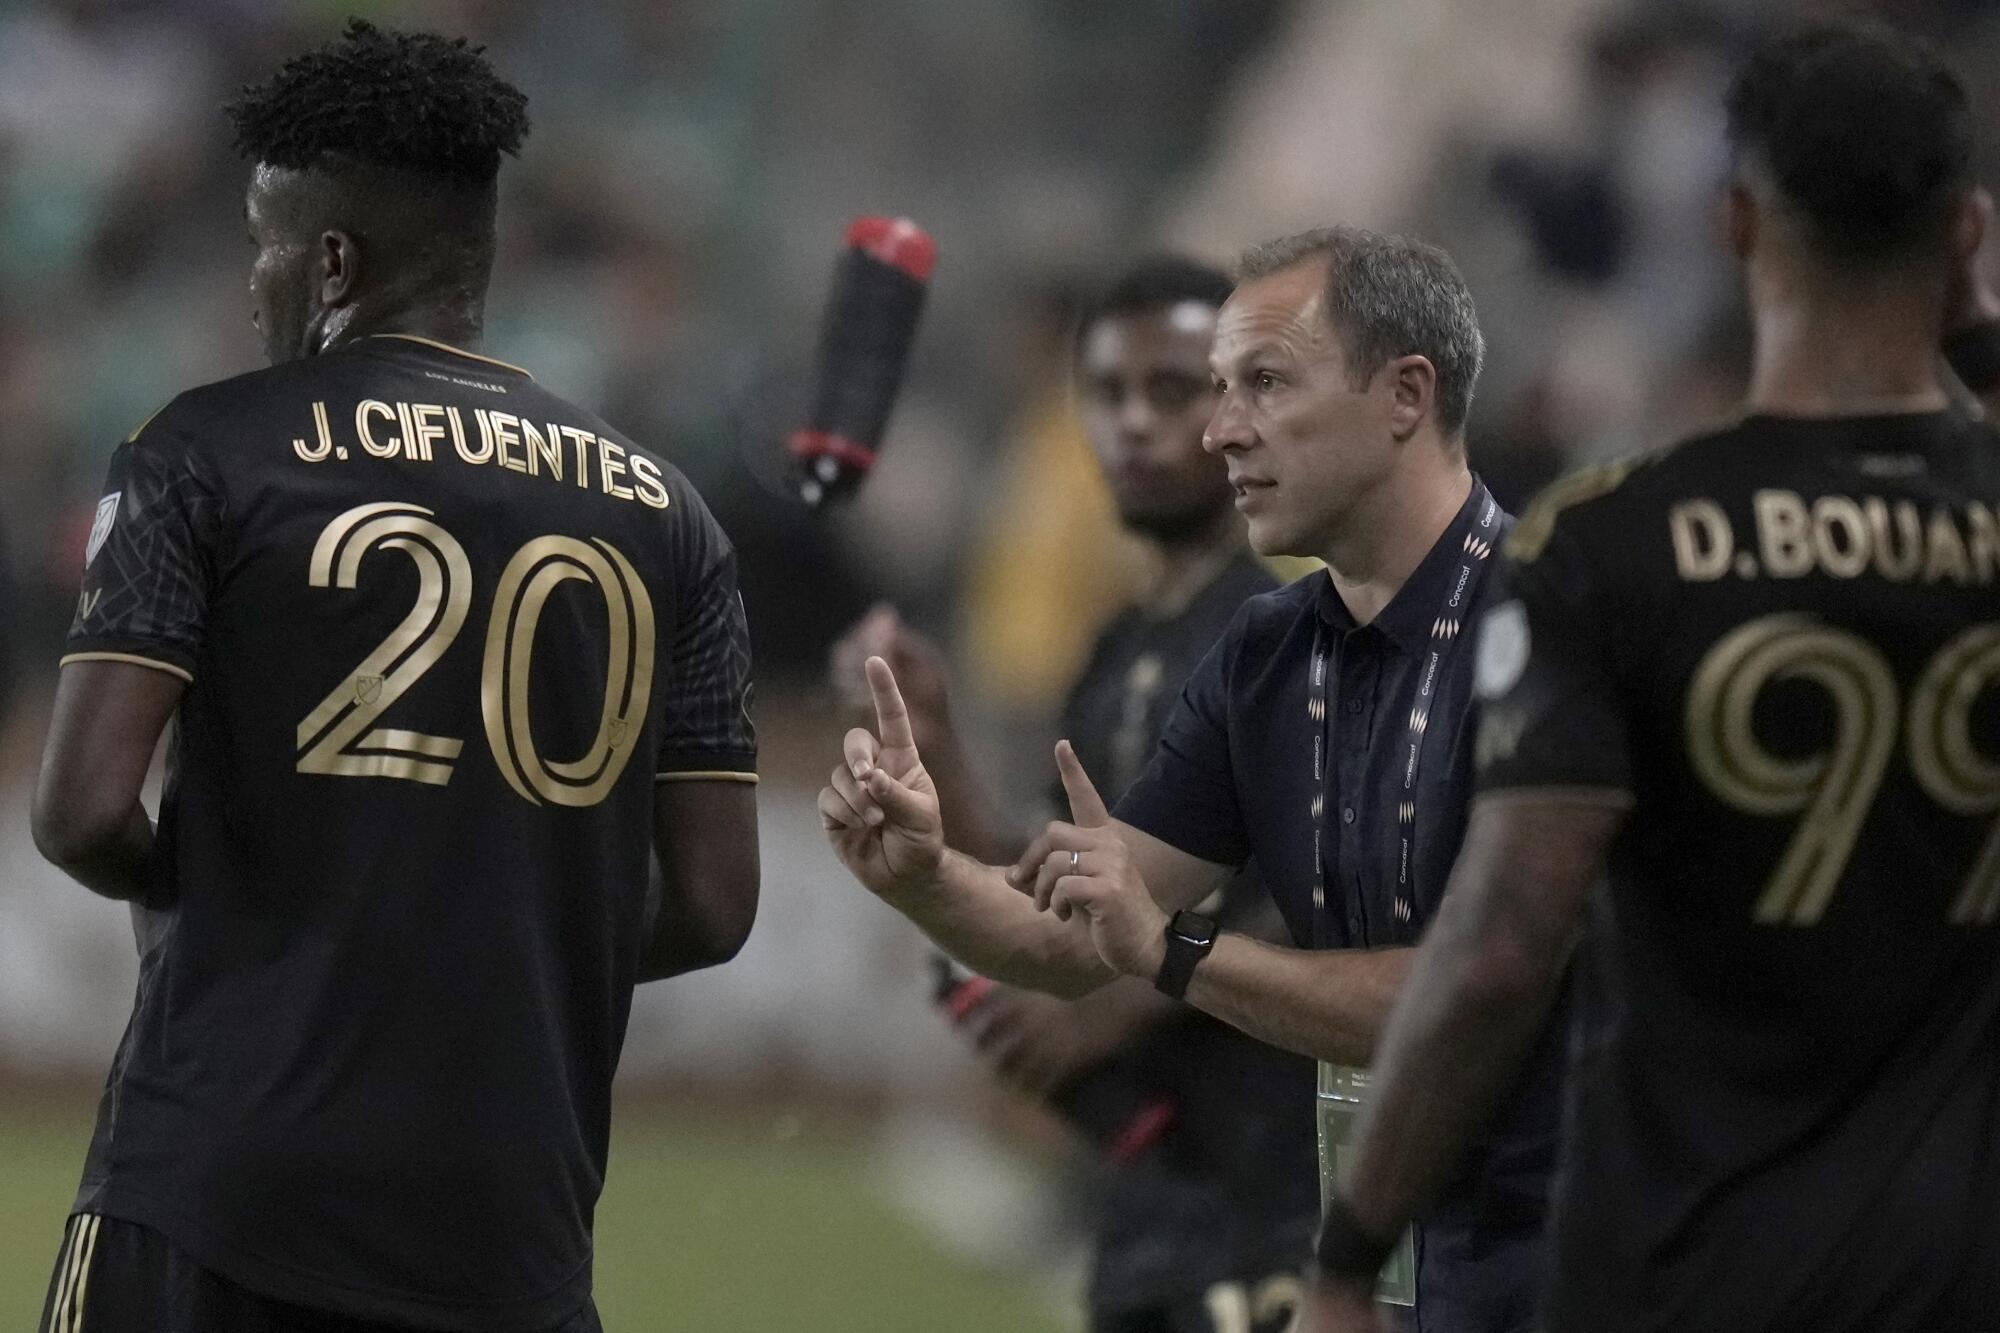 LAFC coach Steve Cherundolo talks with José Cifuentes on the sideline during a match